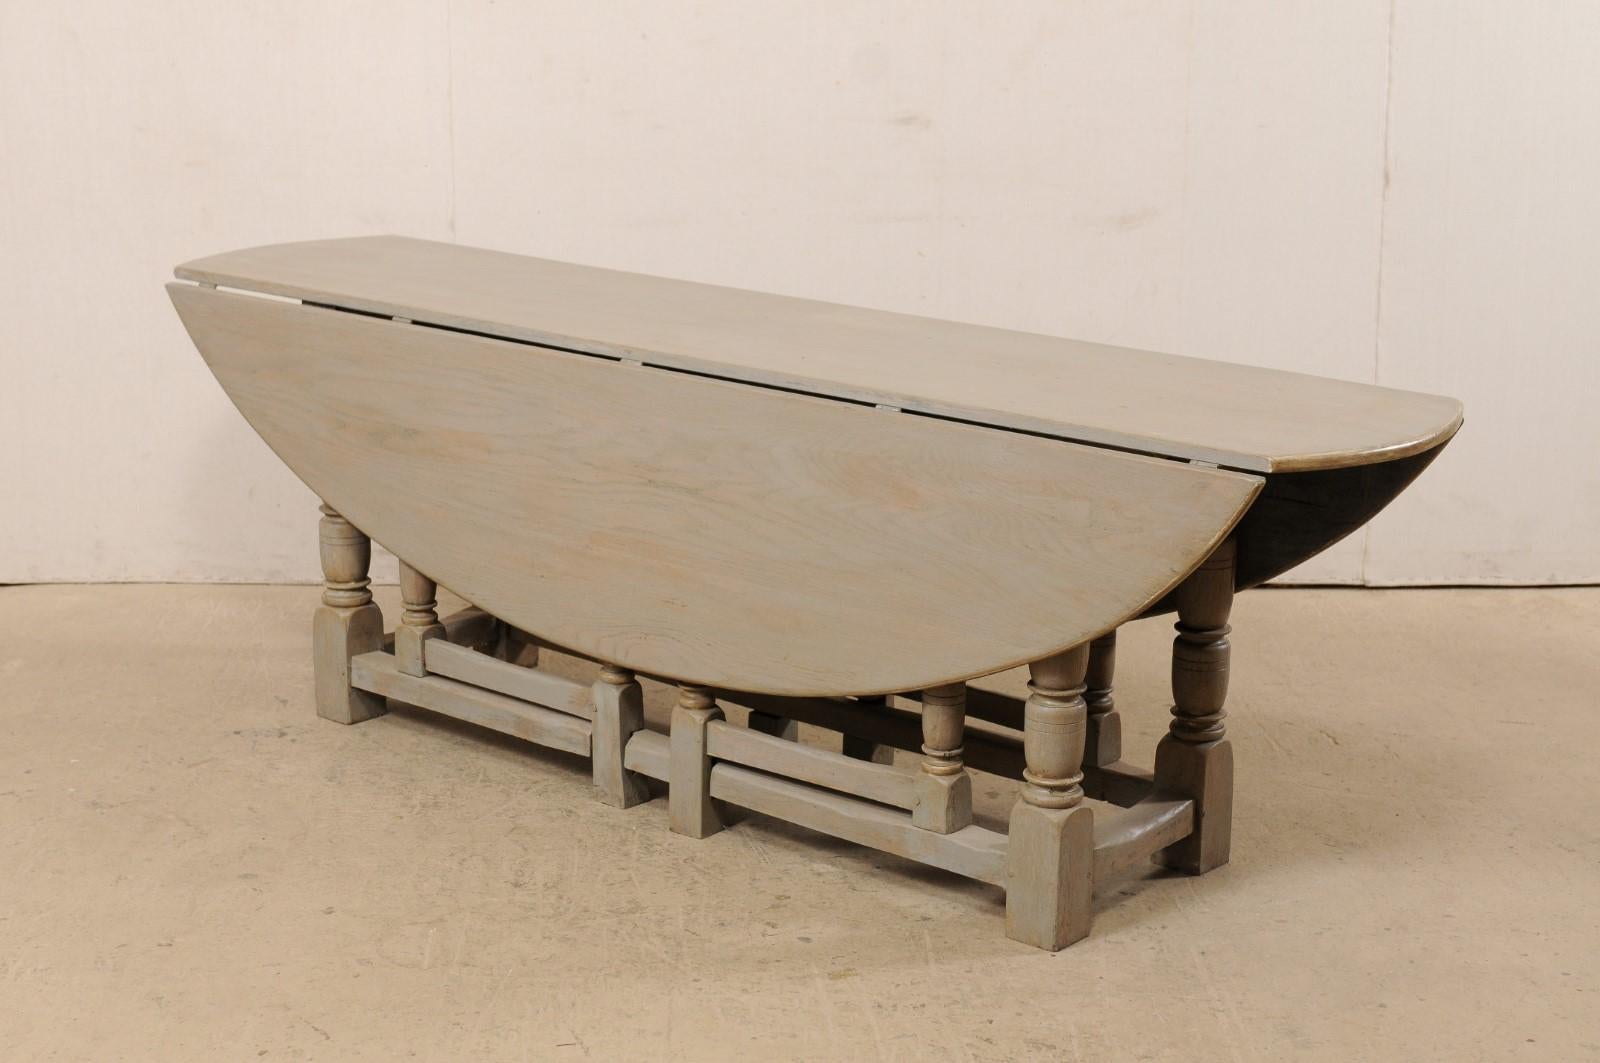 An American painted wood drop leaf and gate-leg table. This vintage oval-shaped table features two drop leaf sides, than when down, make this nicely sized oval table, a more slender 21.5